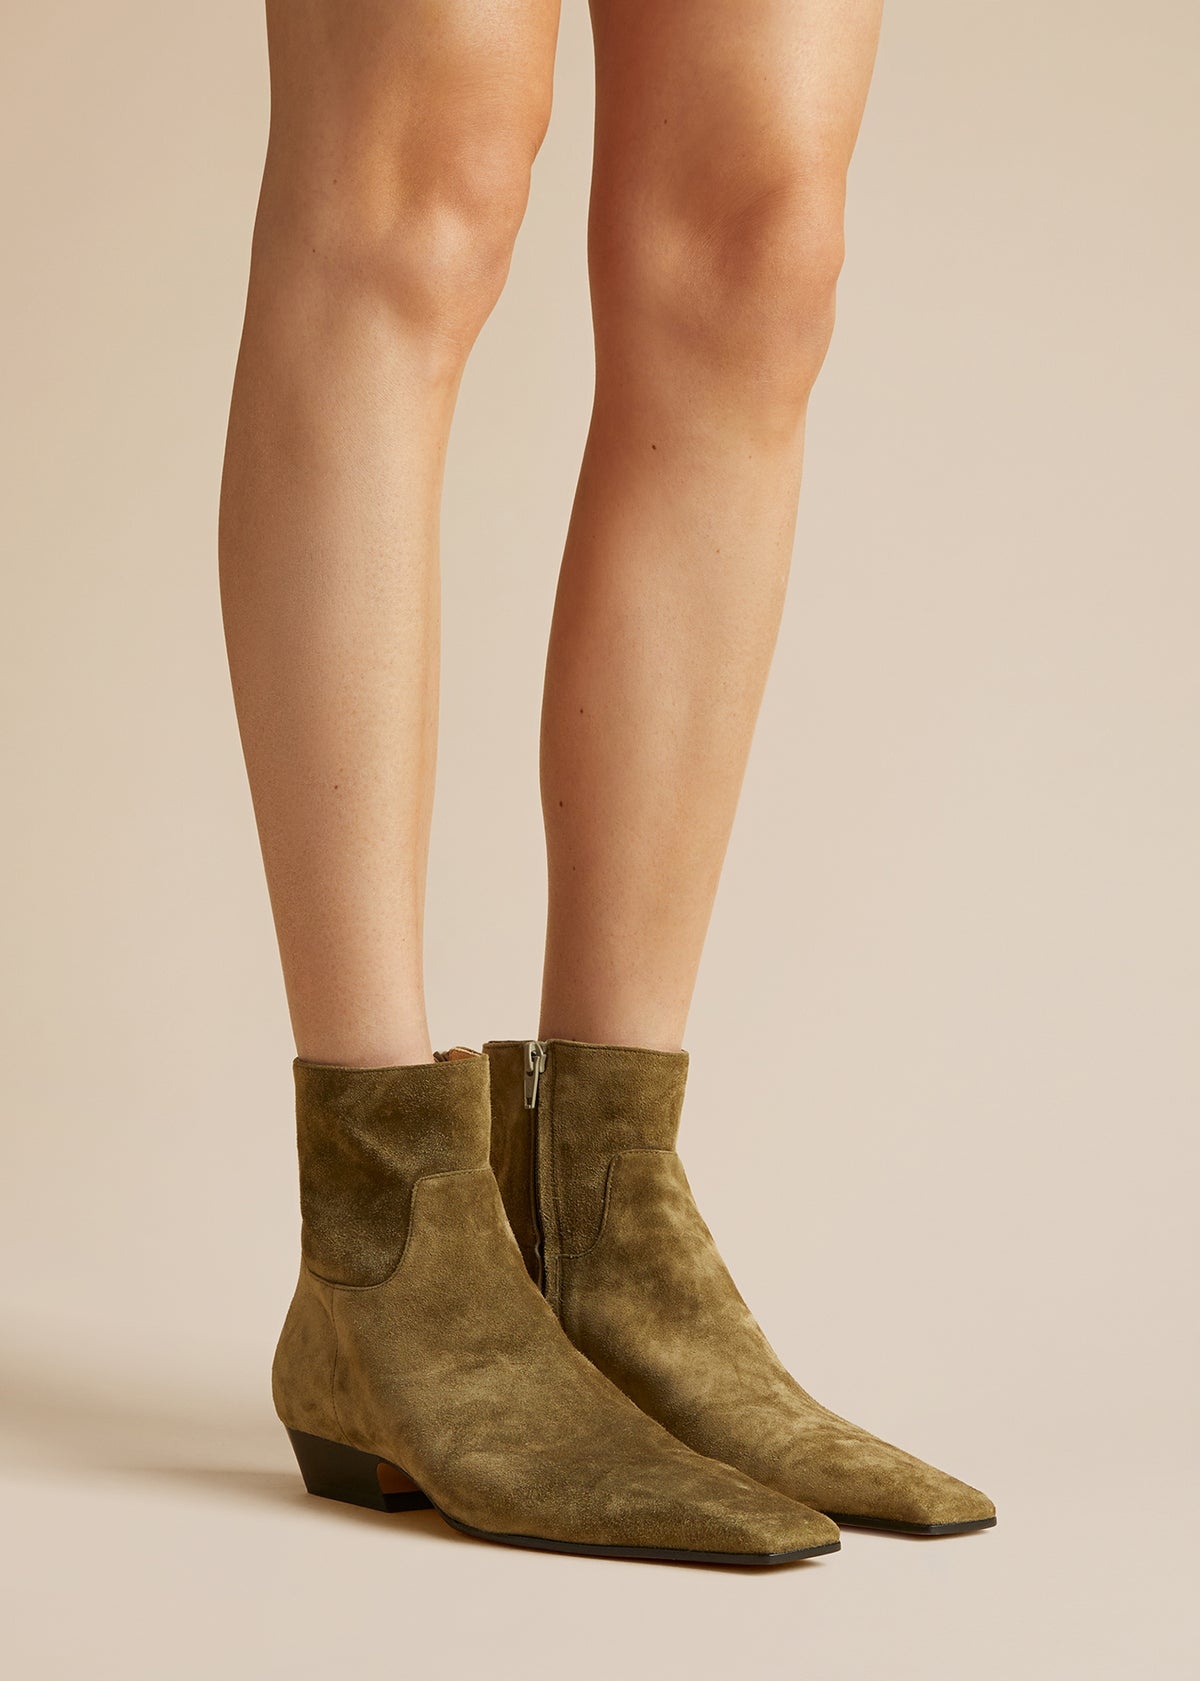 The Marfa Ankle Boot in Khaki Suede - 4